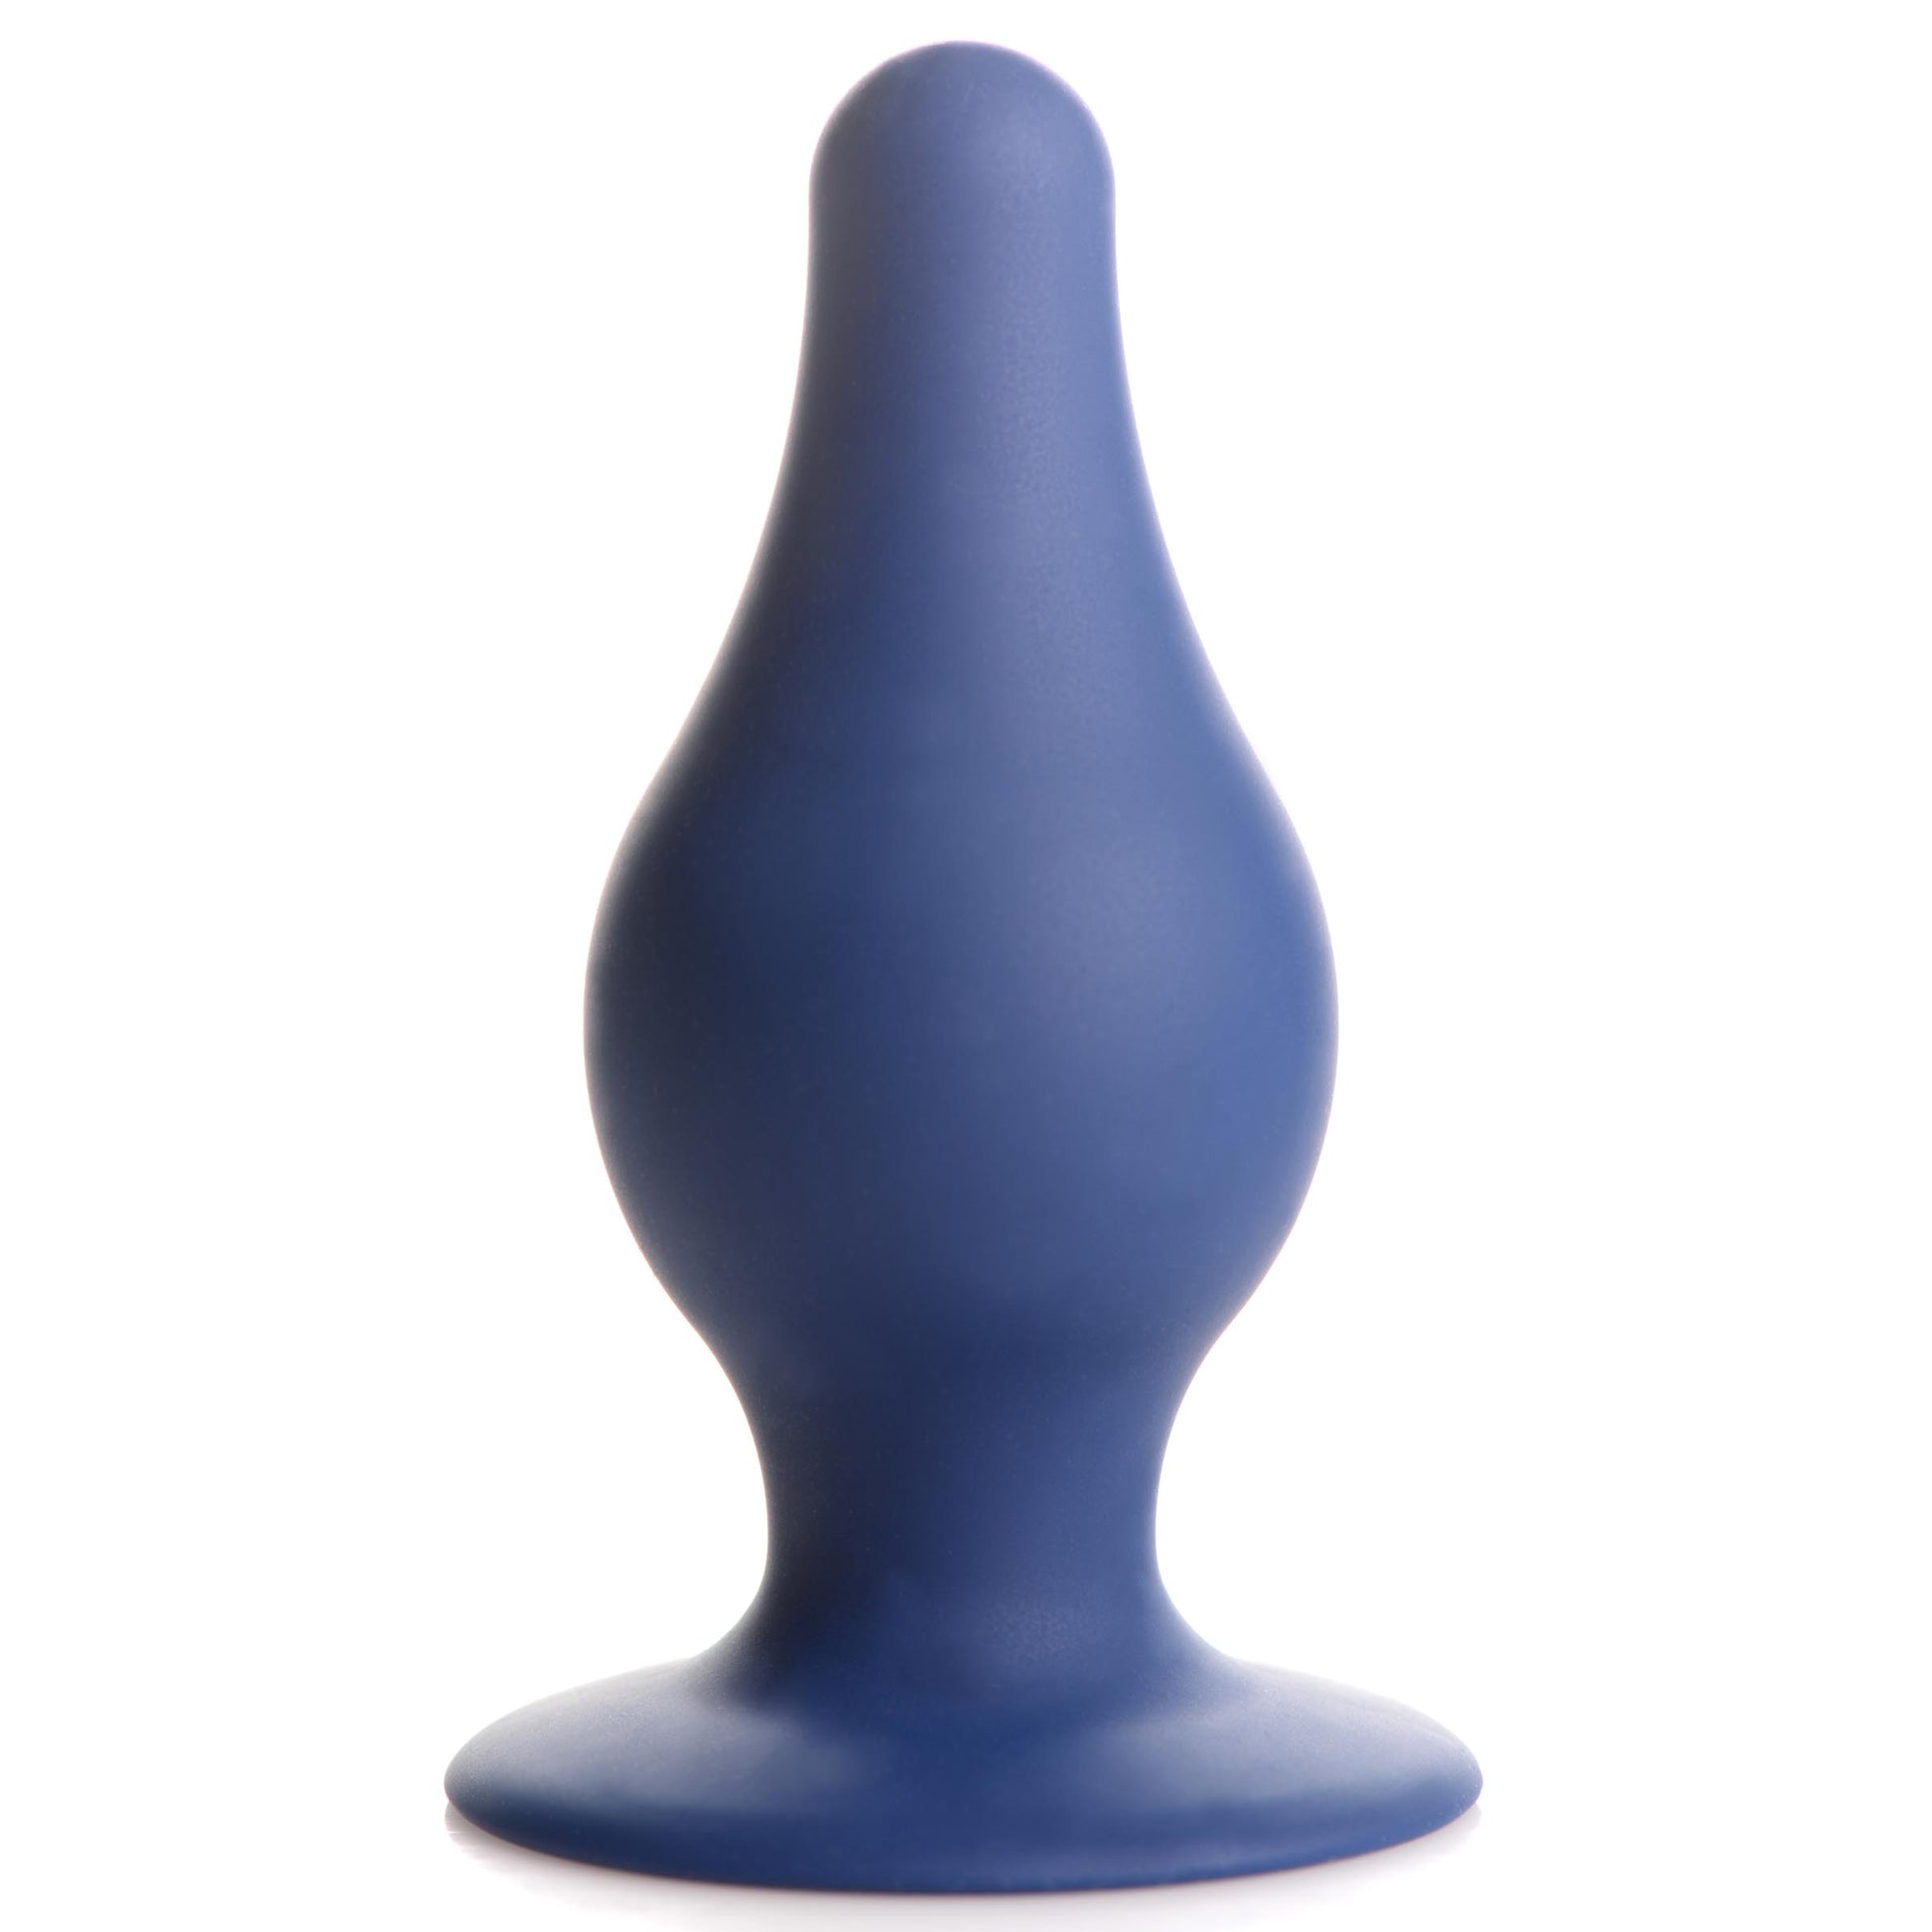 Squeezable Tapered Large Anal Plug - Blue - UABDSM